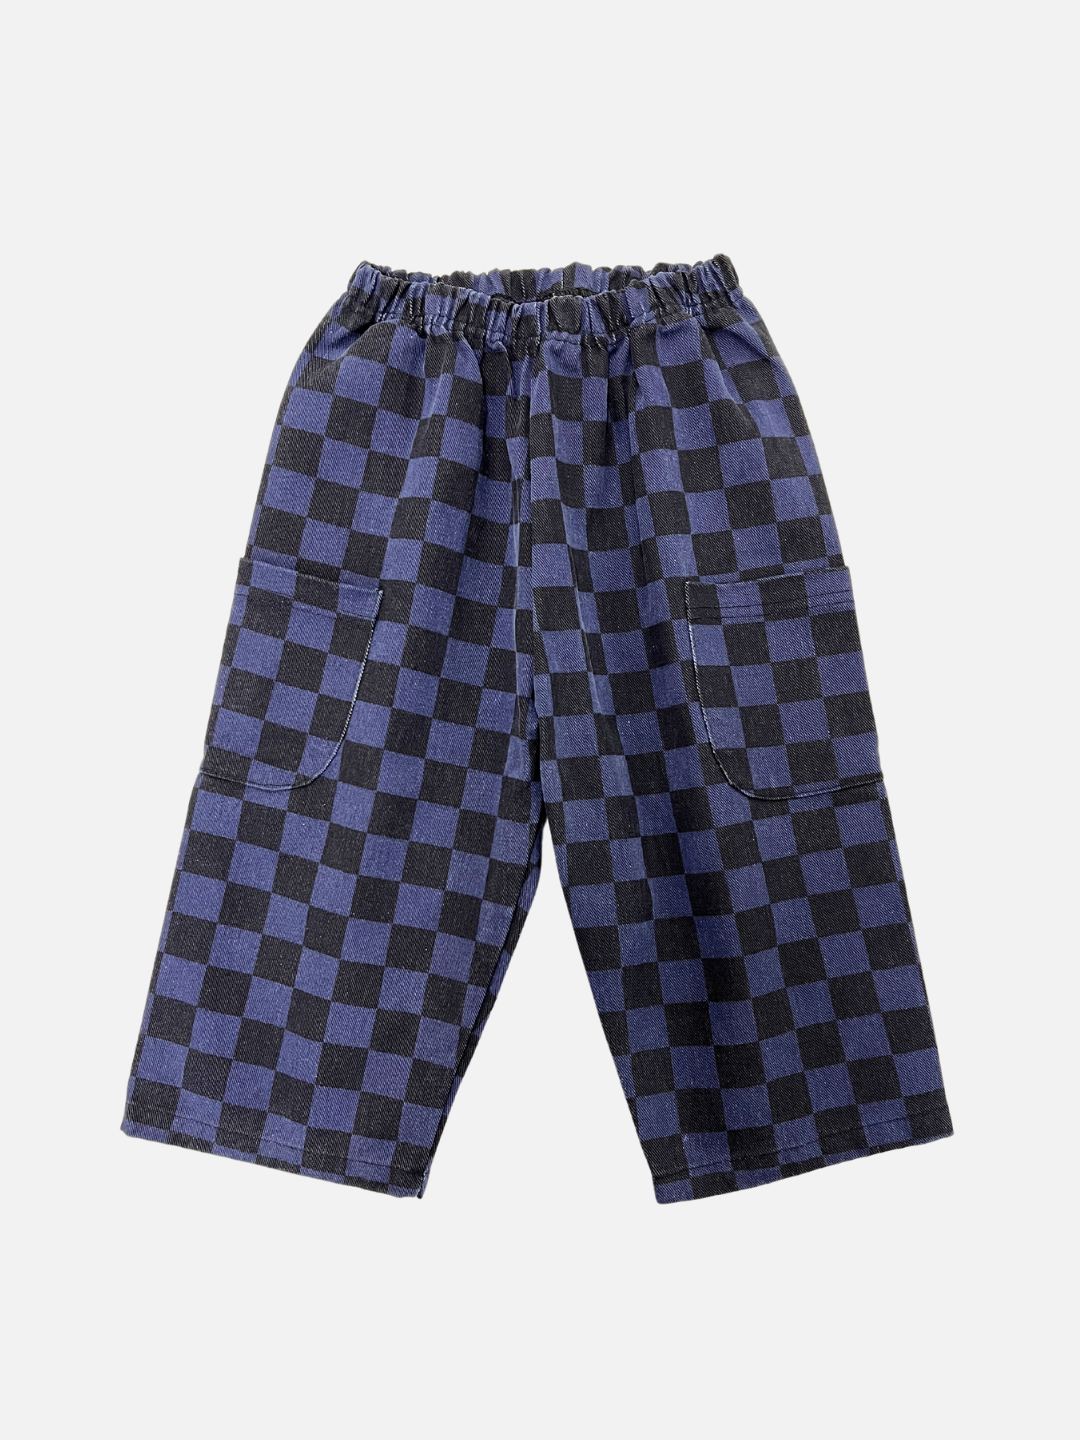 Front view of kids unisex baggy pants in a navy and black checkerboard pattern.